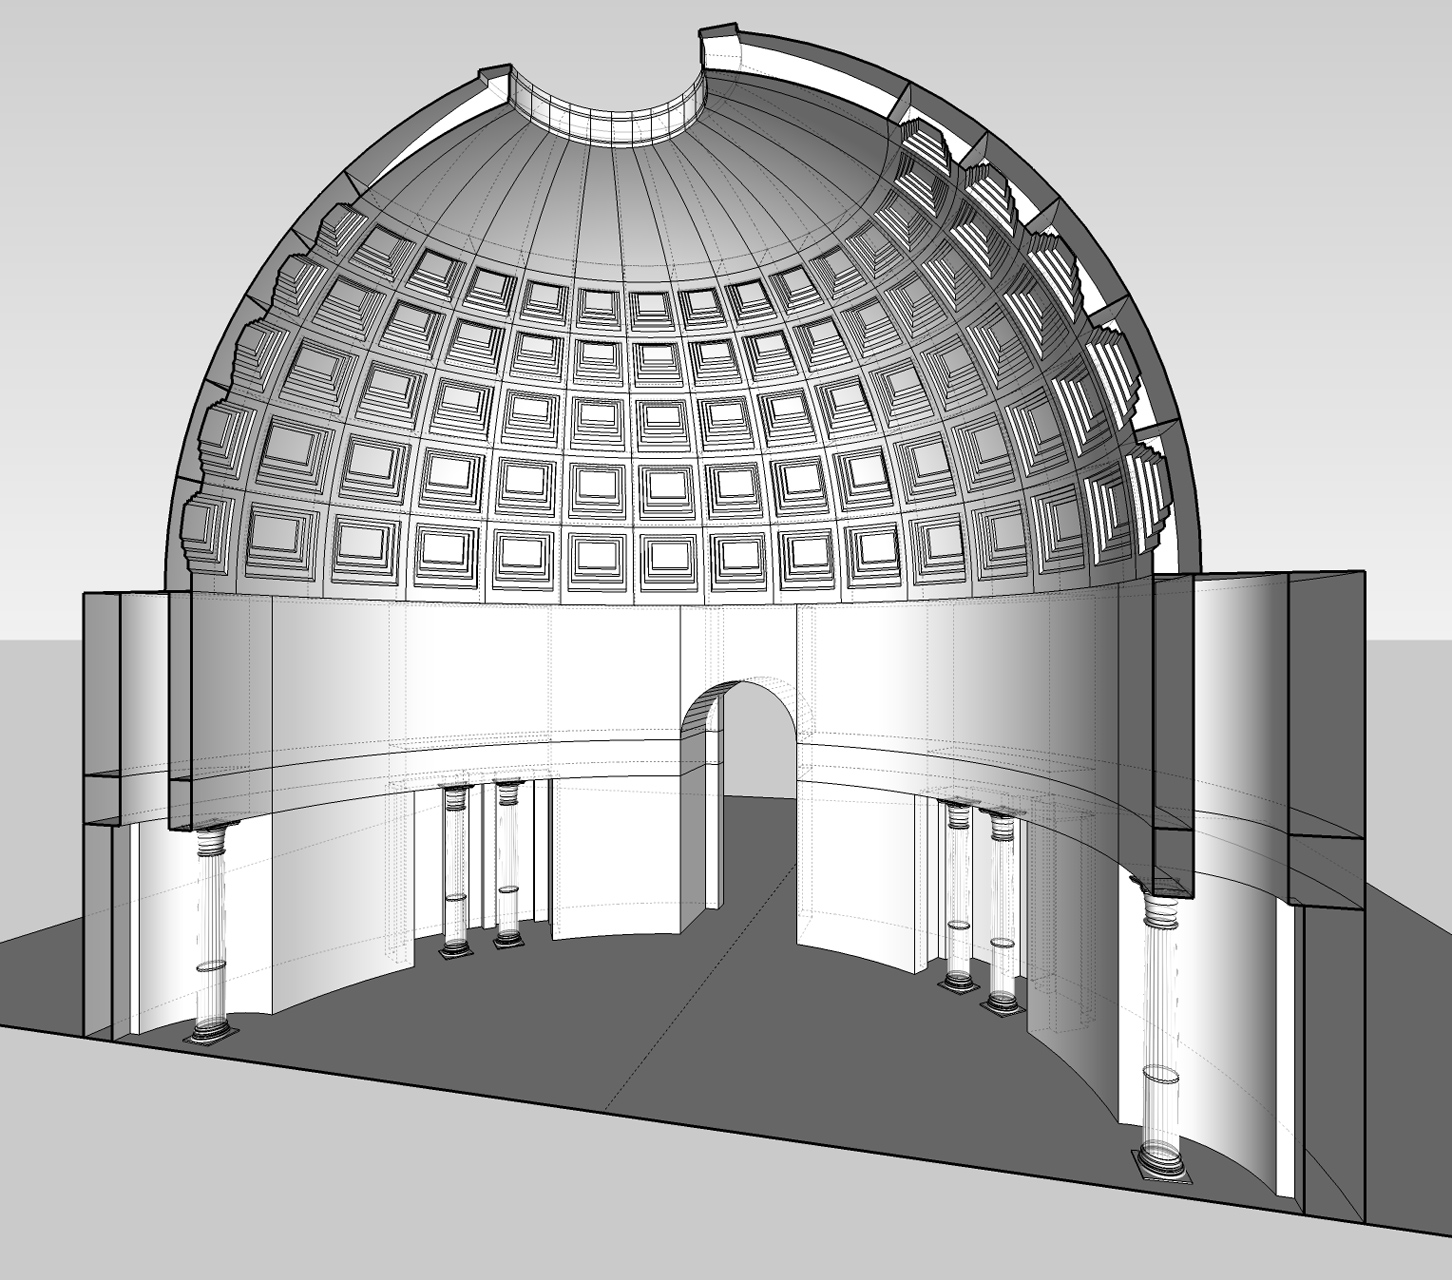 I used SketchUp to model the general scene